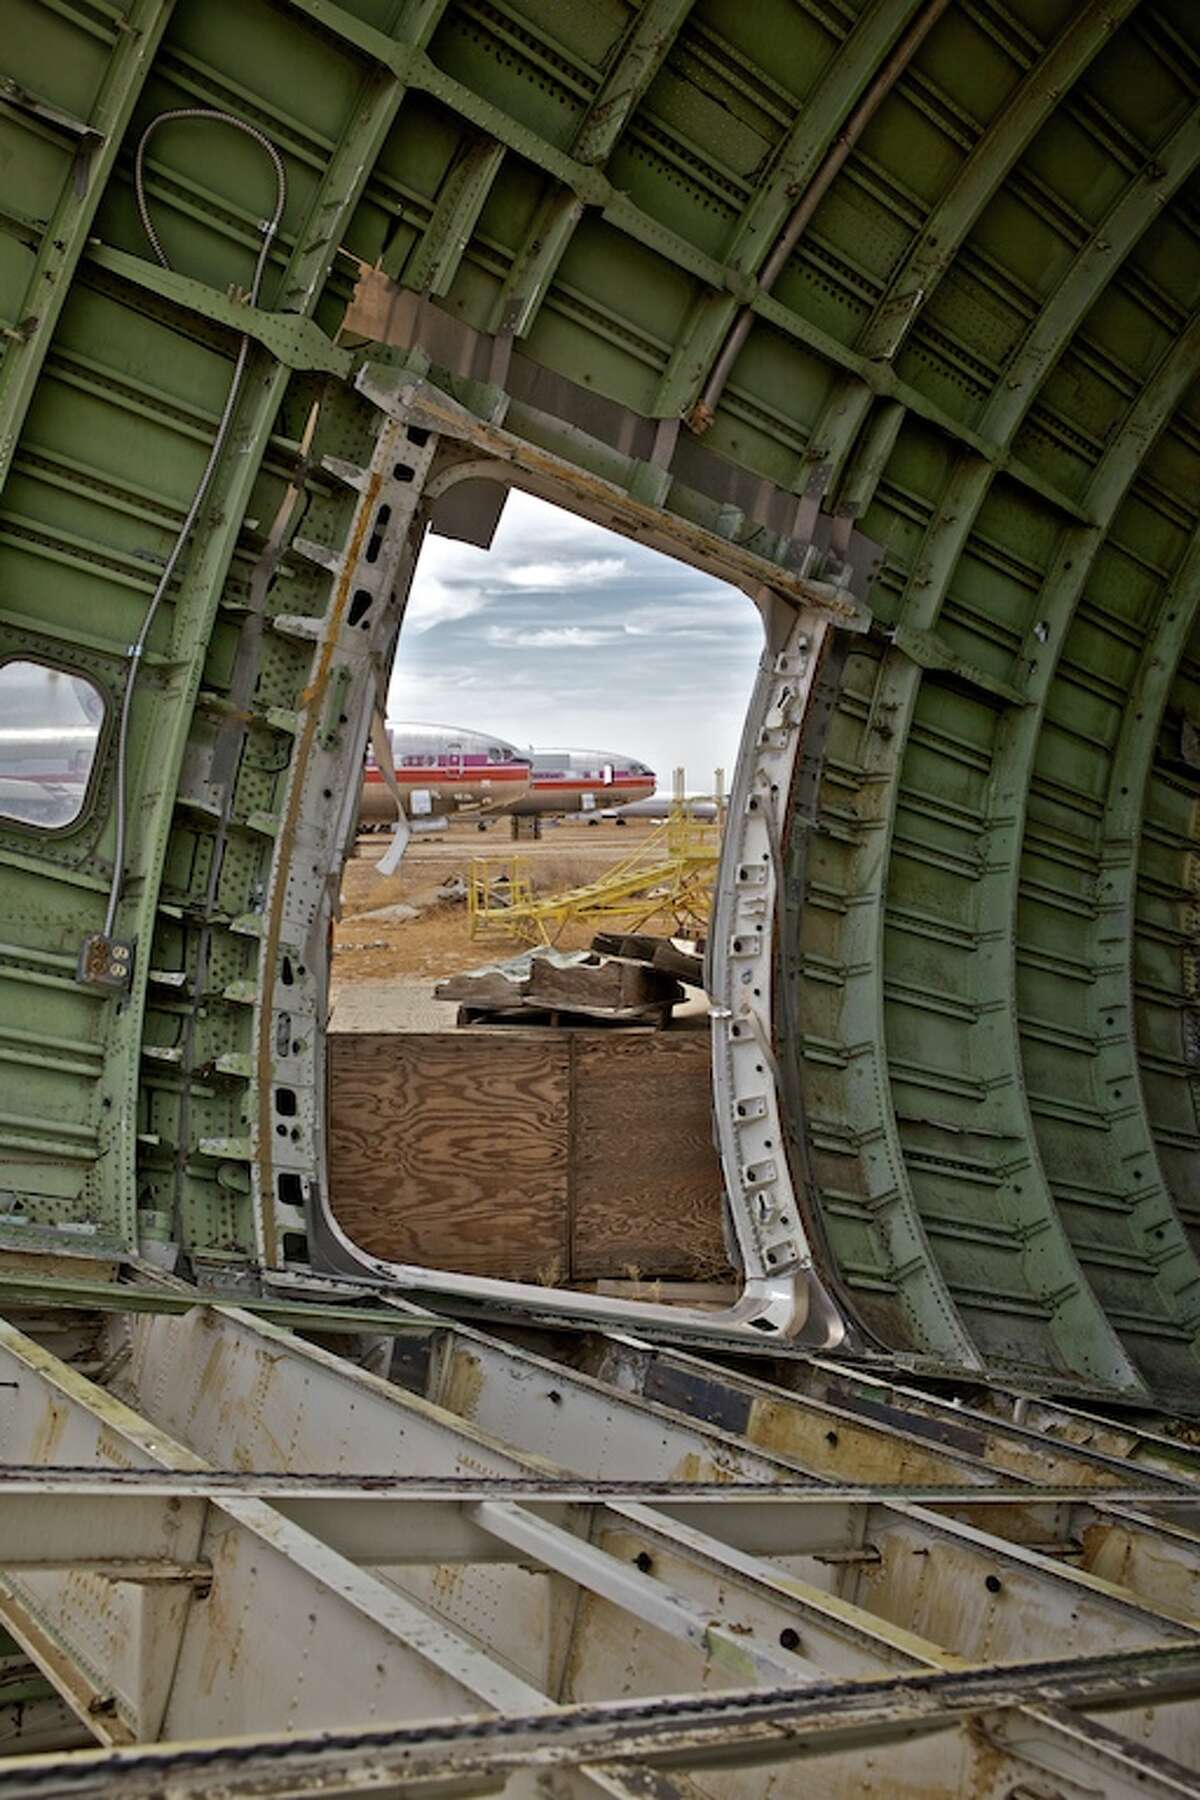 Inside an old airliner at the airplane graveyard near Mojave Air and Space Port, in Mojave, Calif.